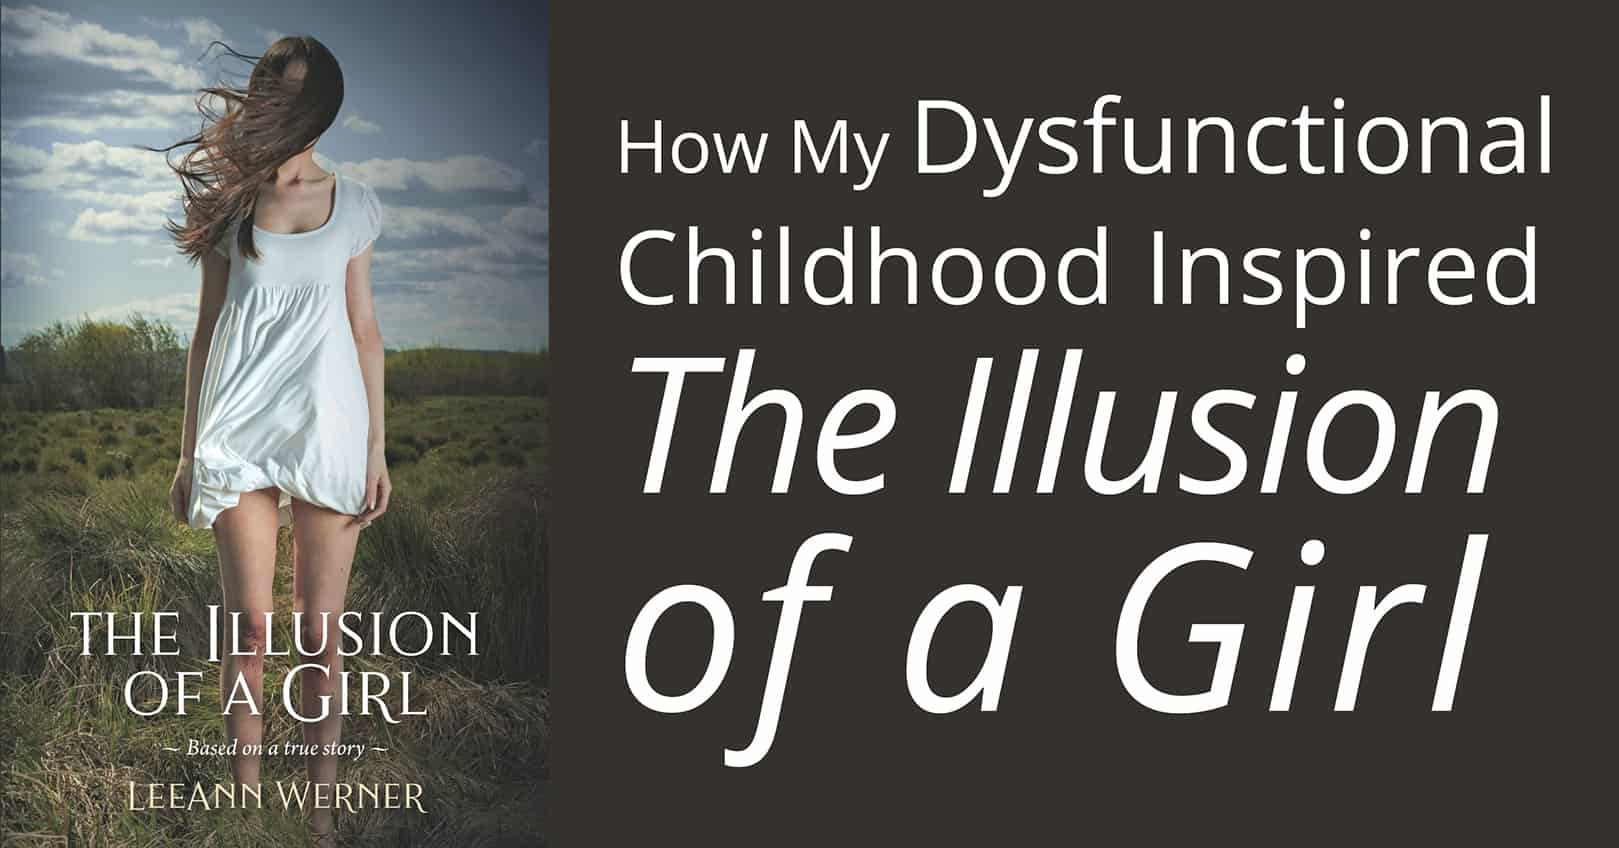 dysfunction childhood inspired Illusions of a Girl